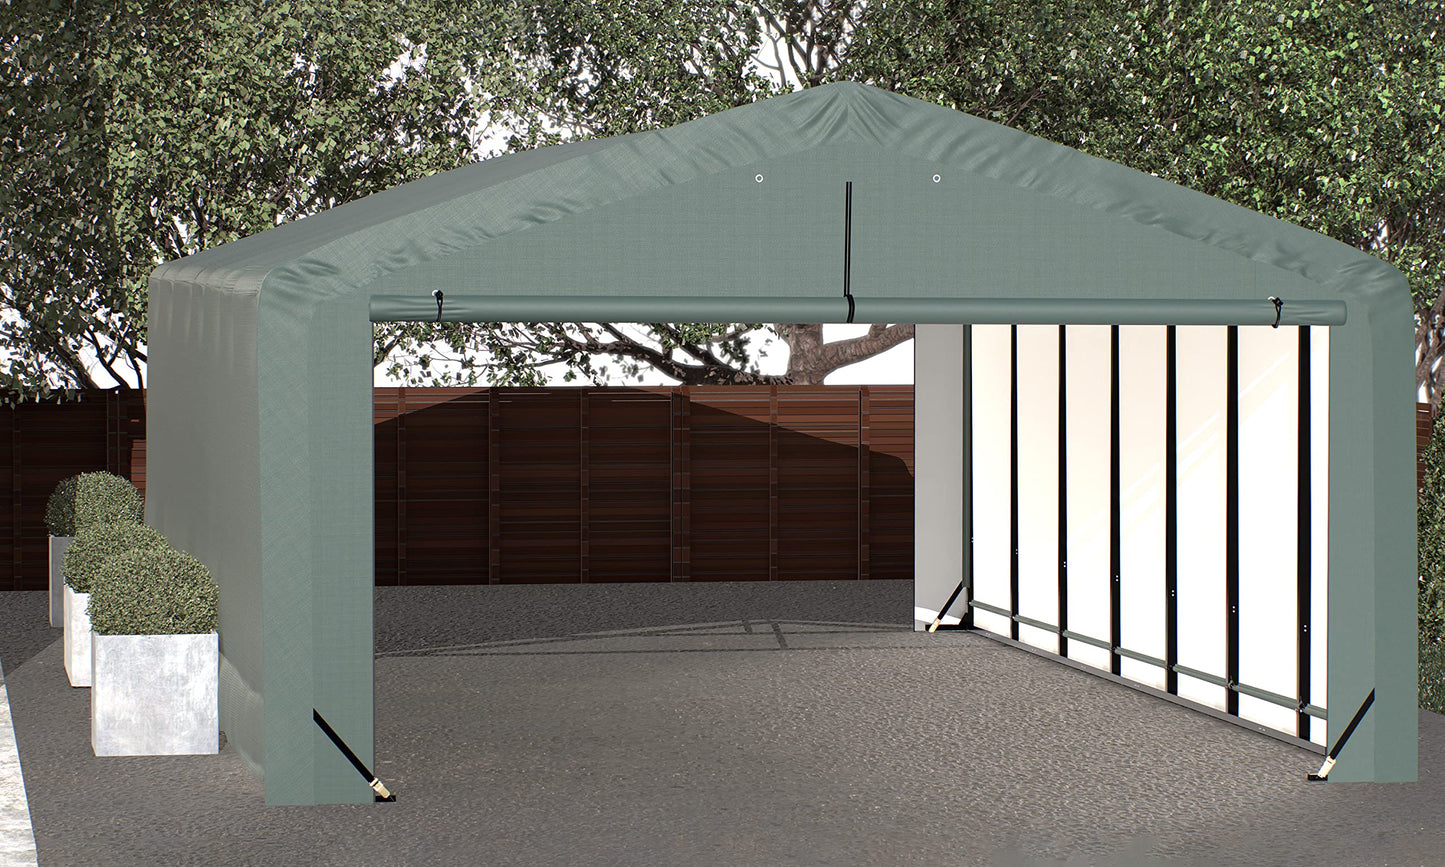 ShelterLogic ShelterTube Garage & Storage Shelter, 20' x 32' x 12' Heavy-Duty Steel Frame Wind and Snow-Load Rated Enclosure, Green 20' x 32' x 12'